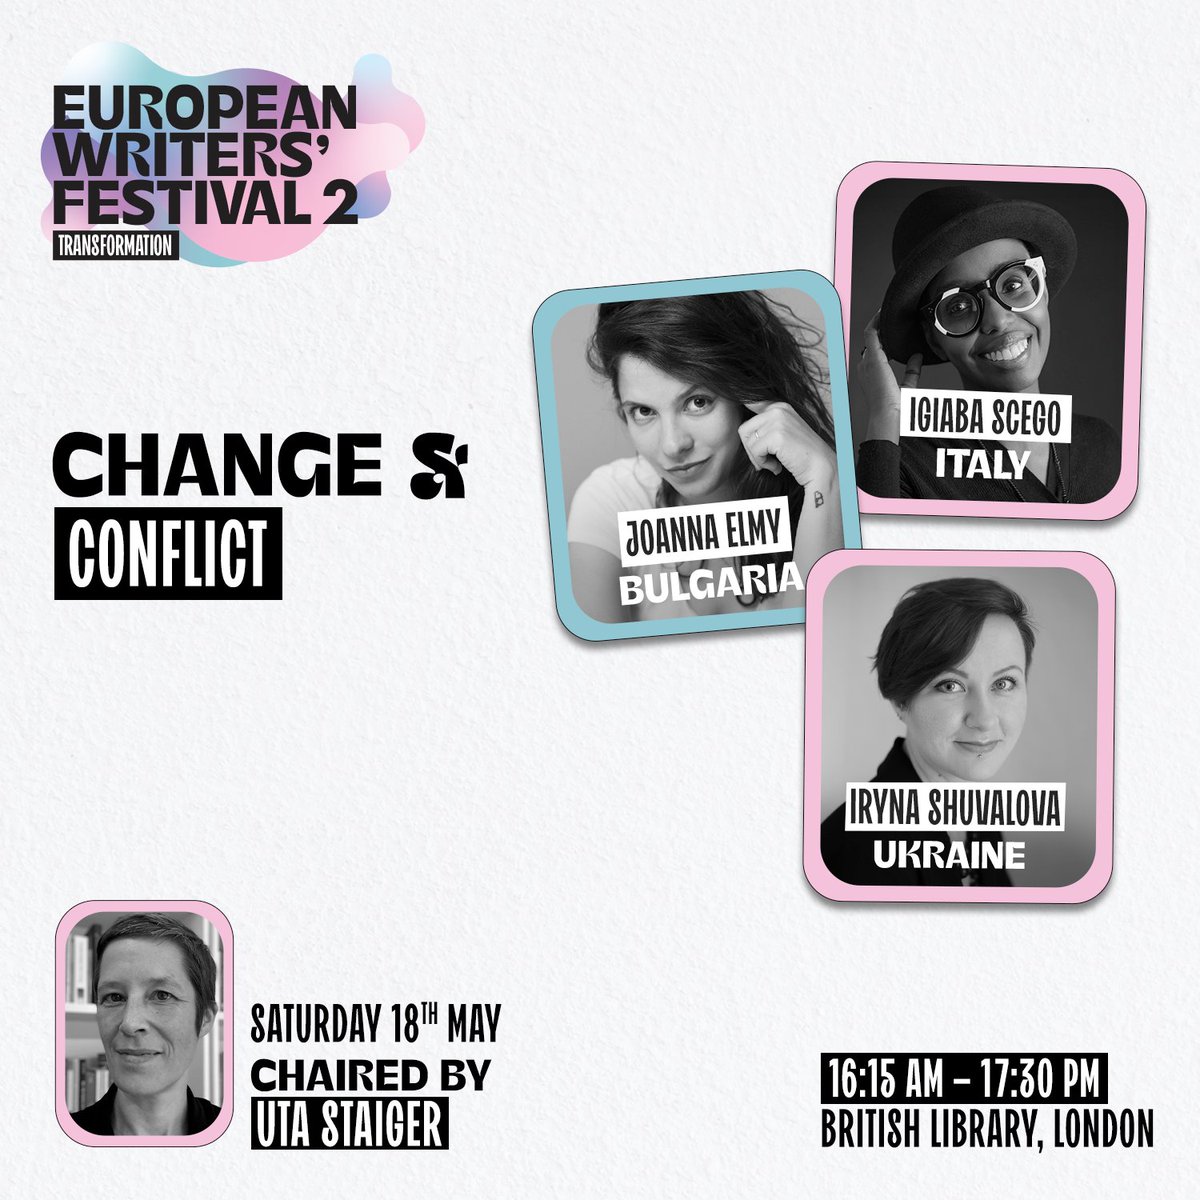 And on the first day, we created 4 panels! Panel 4 will be chaired by @ukstaiger of @UCL_EI and looks set to discuss 'Change & conflict' Featuring @casamacombo & Iryna Shuvalova from @UkrEmbLondon @eurolitnet @britishlibrary @GoldRosie @ItalyinUK